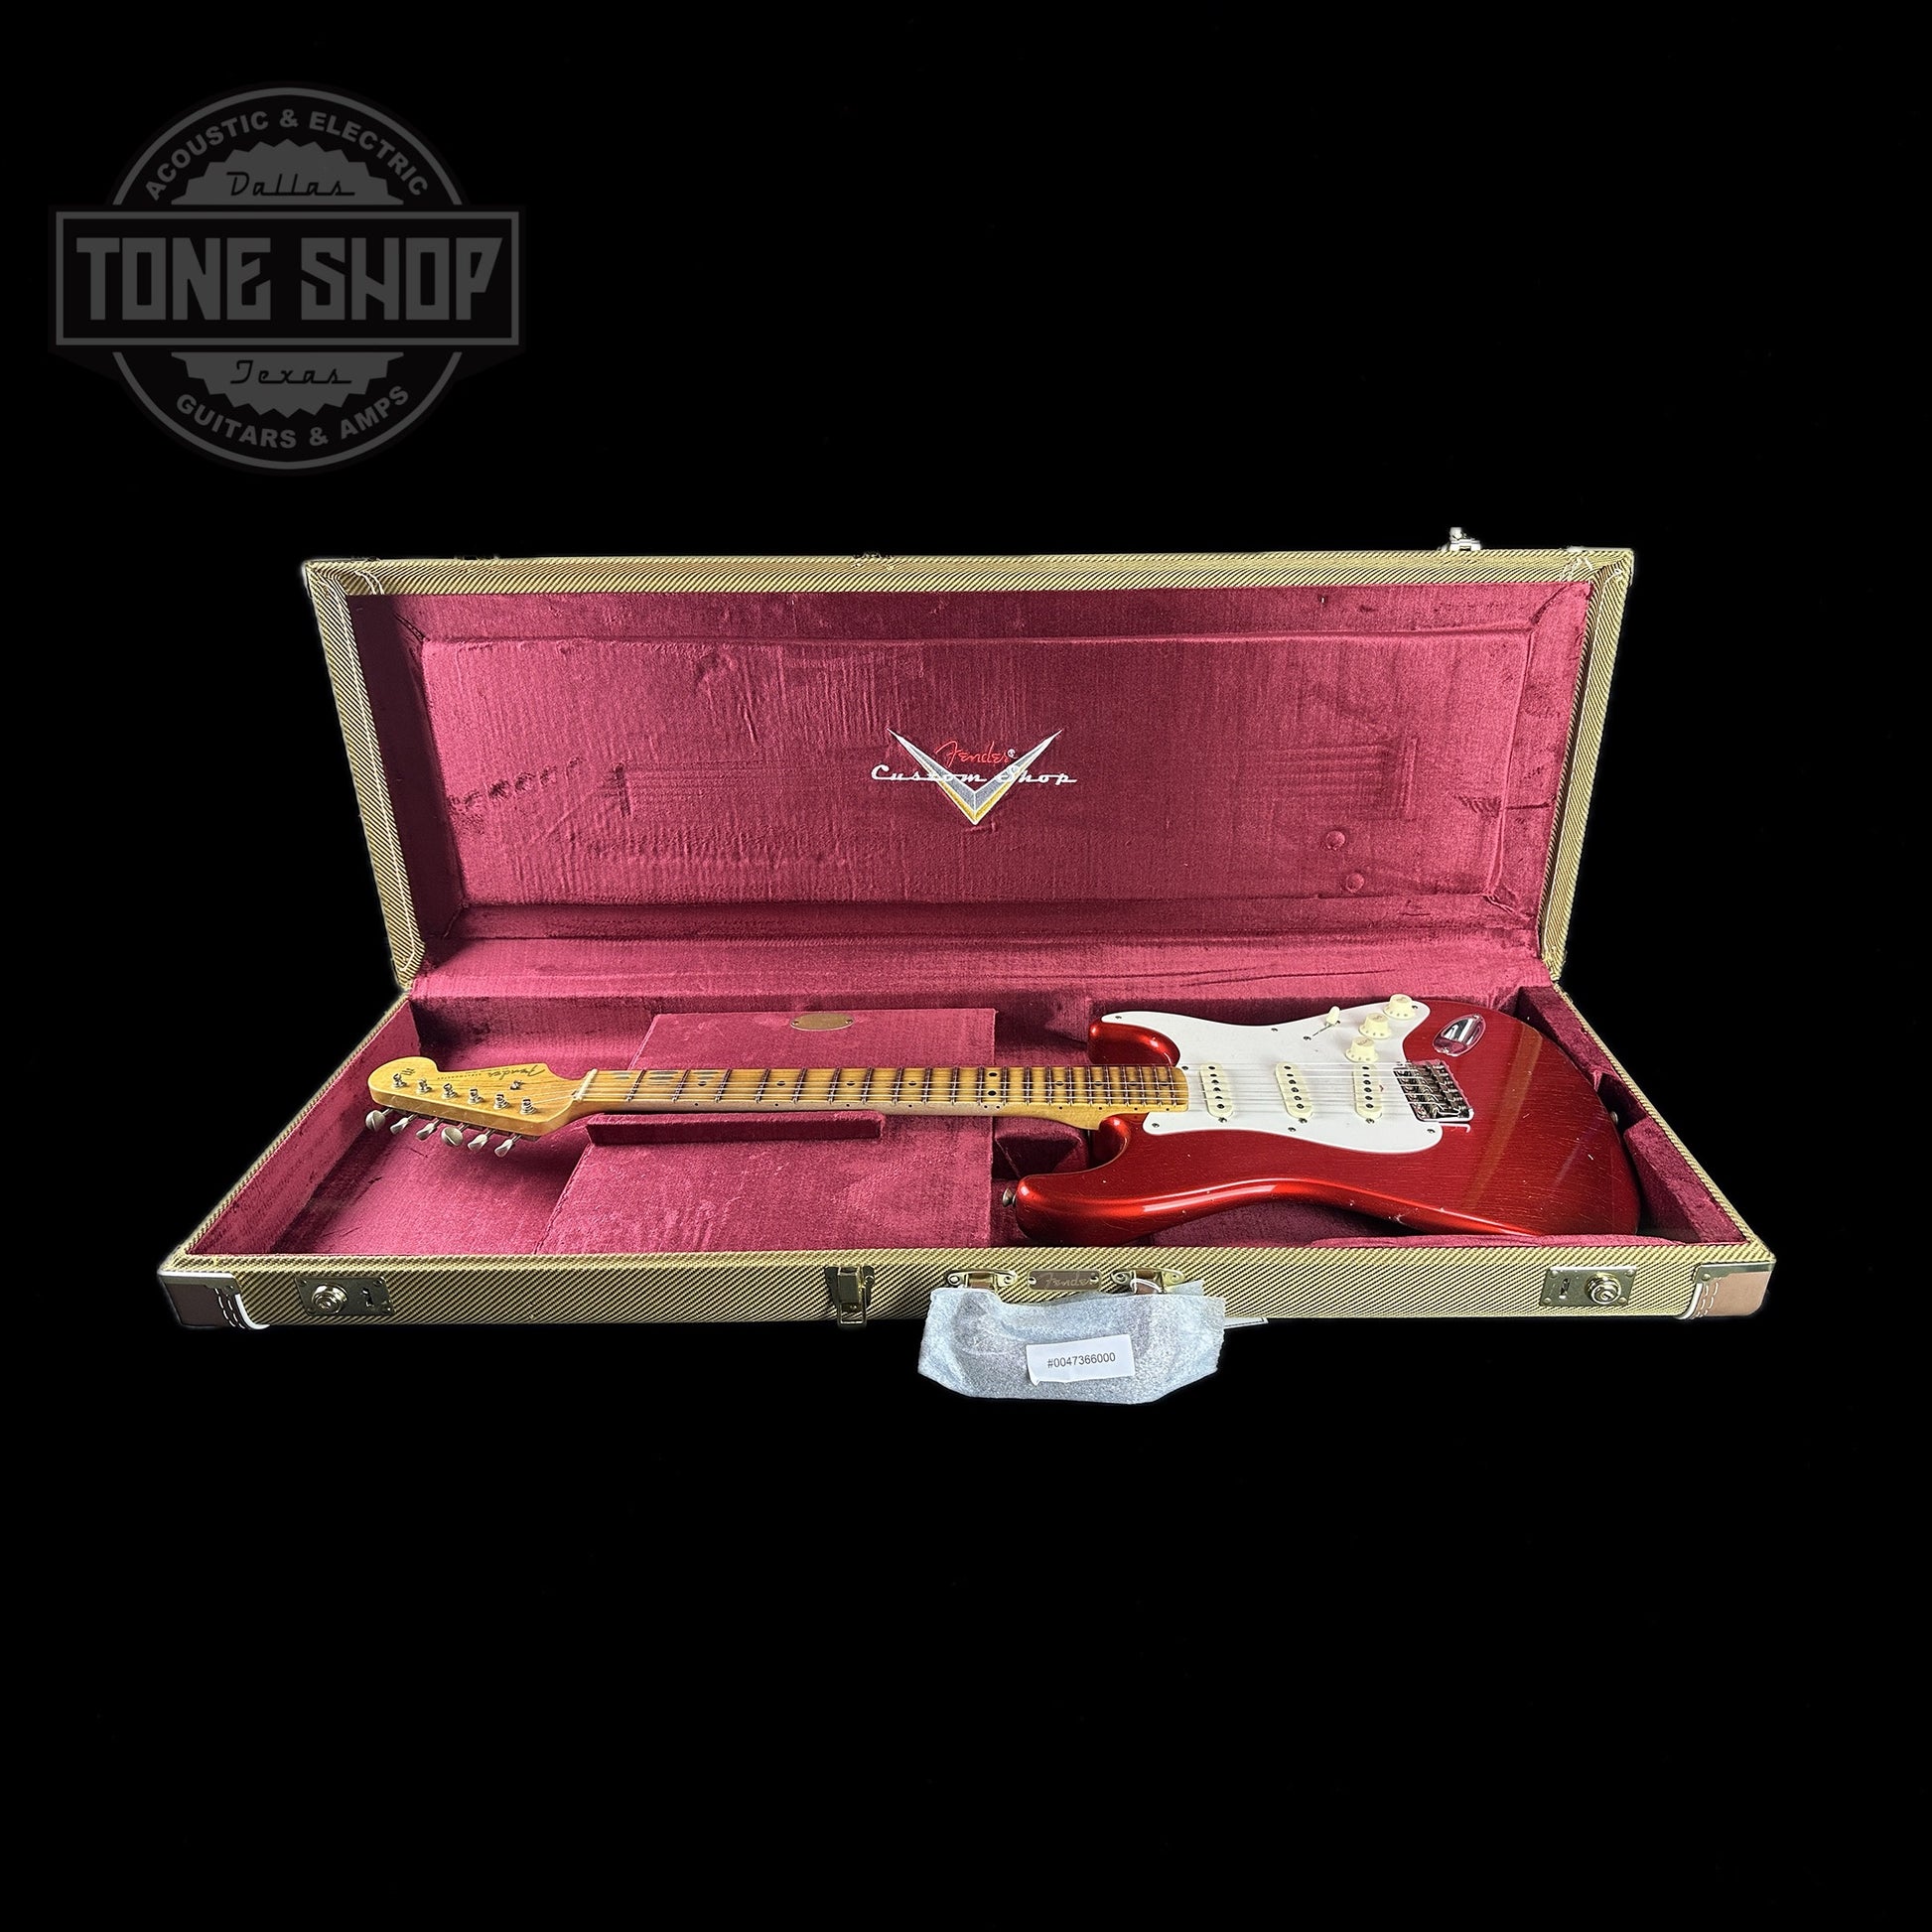 Fender Custom Shop Limited Edition 56 Strat Journeyman Relic Super Faded Aged Candy Apple Red in case.